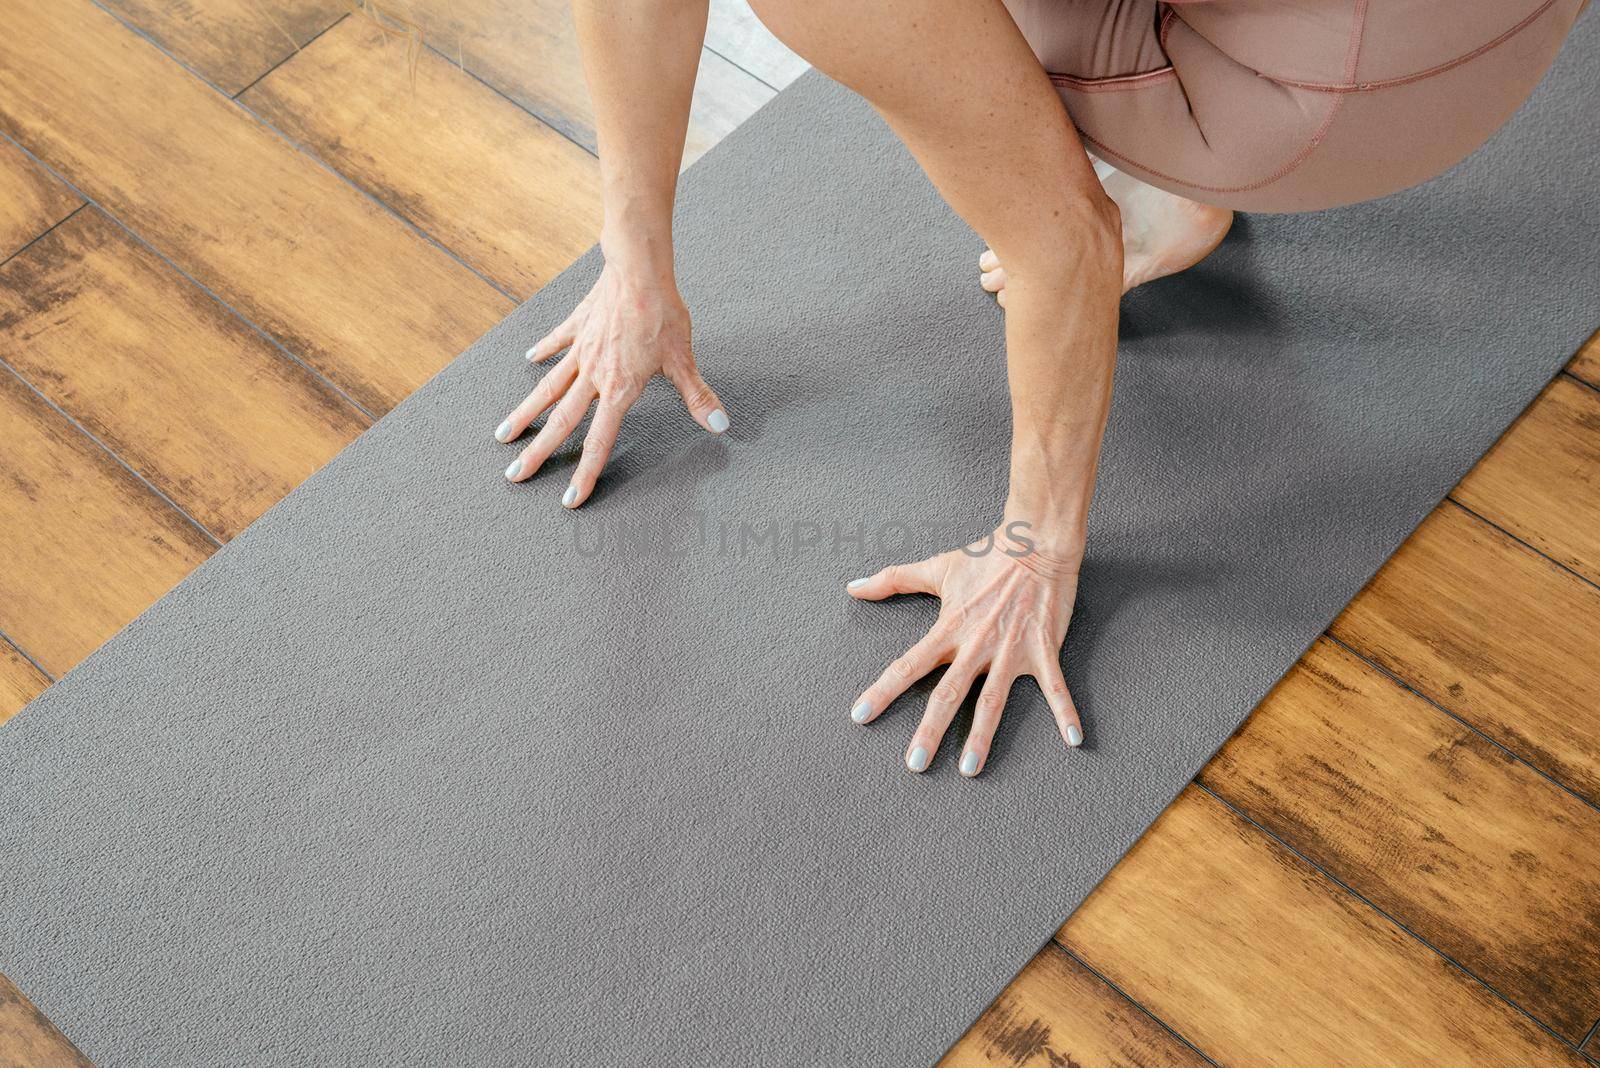 Cropped view of mature woman doing yoga or pilates on mat by Mariakray